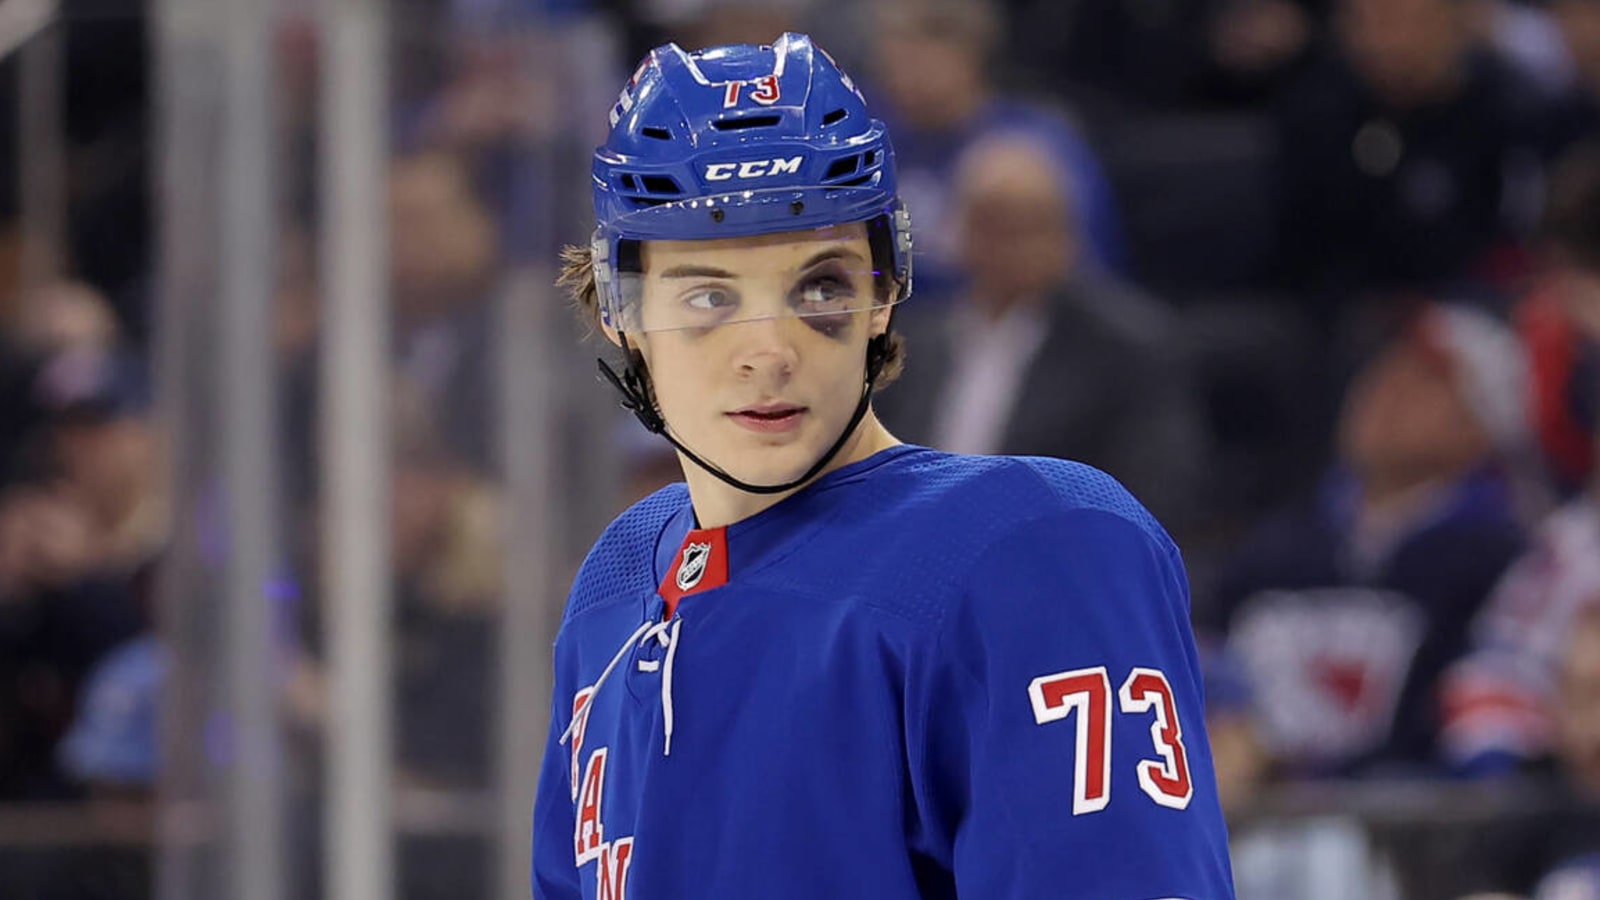 Rangers rookie vying to resurrect hockey fights